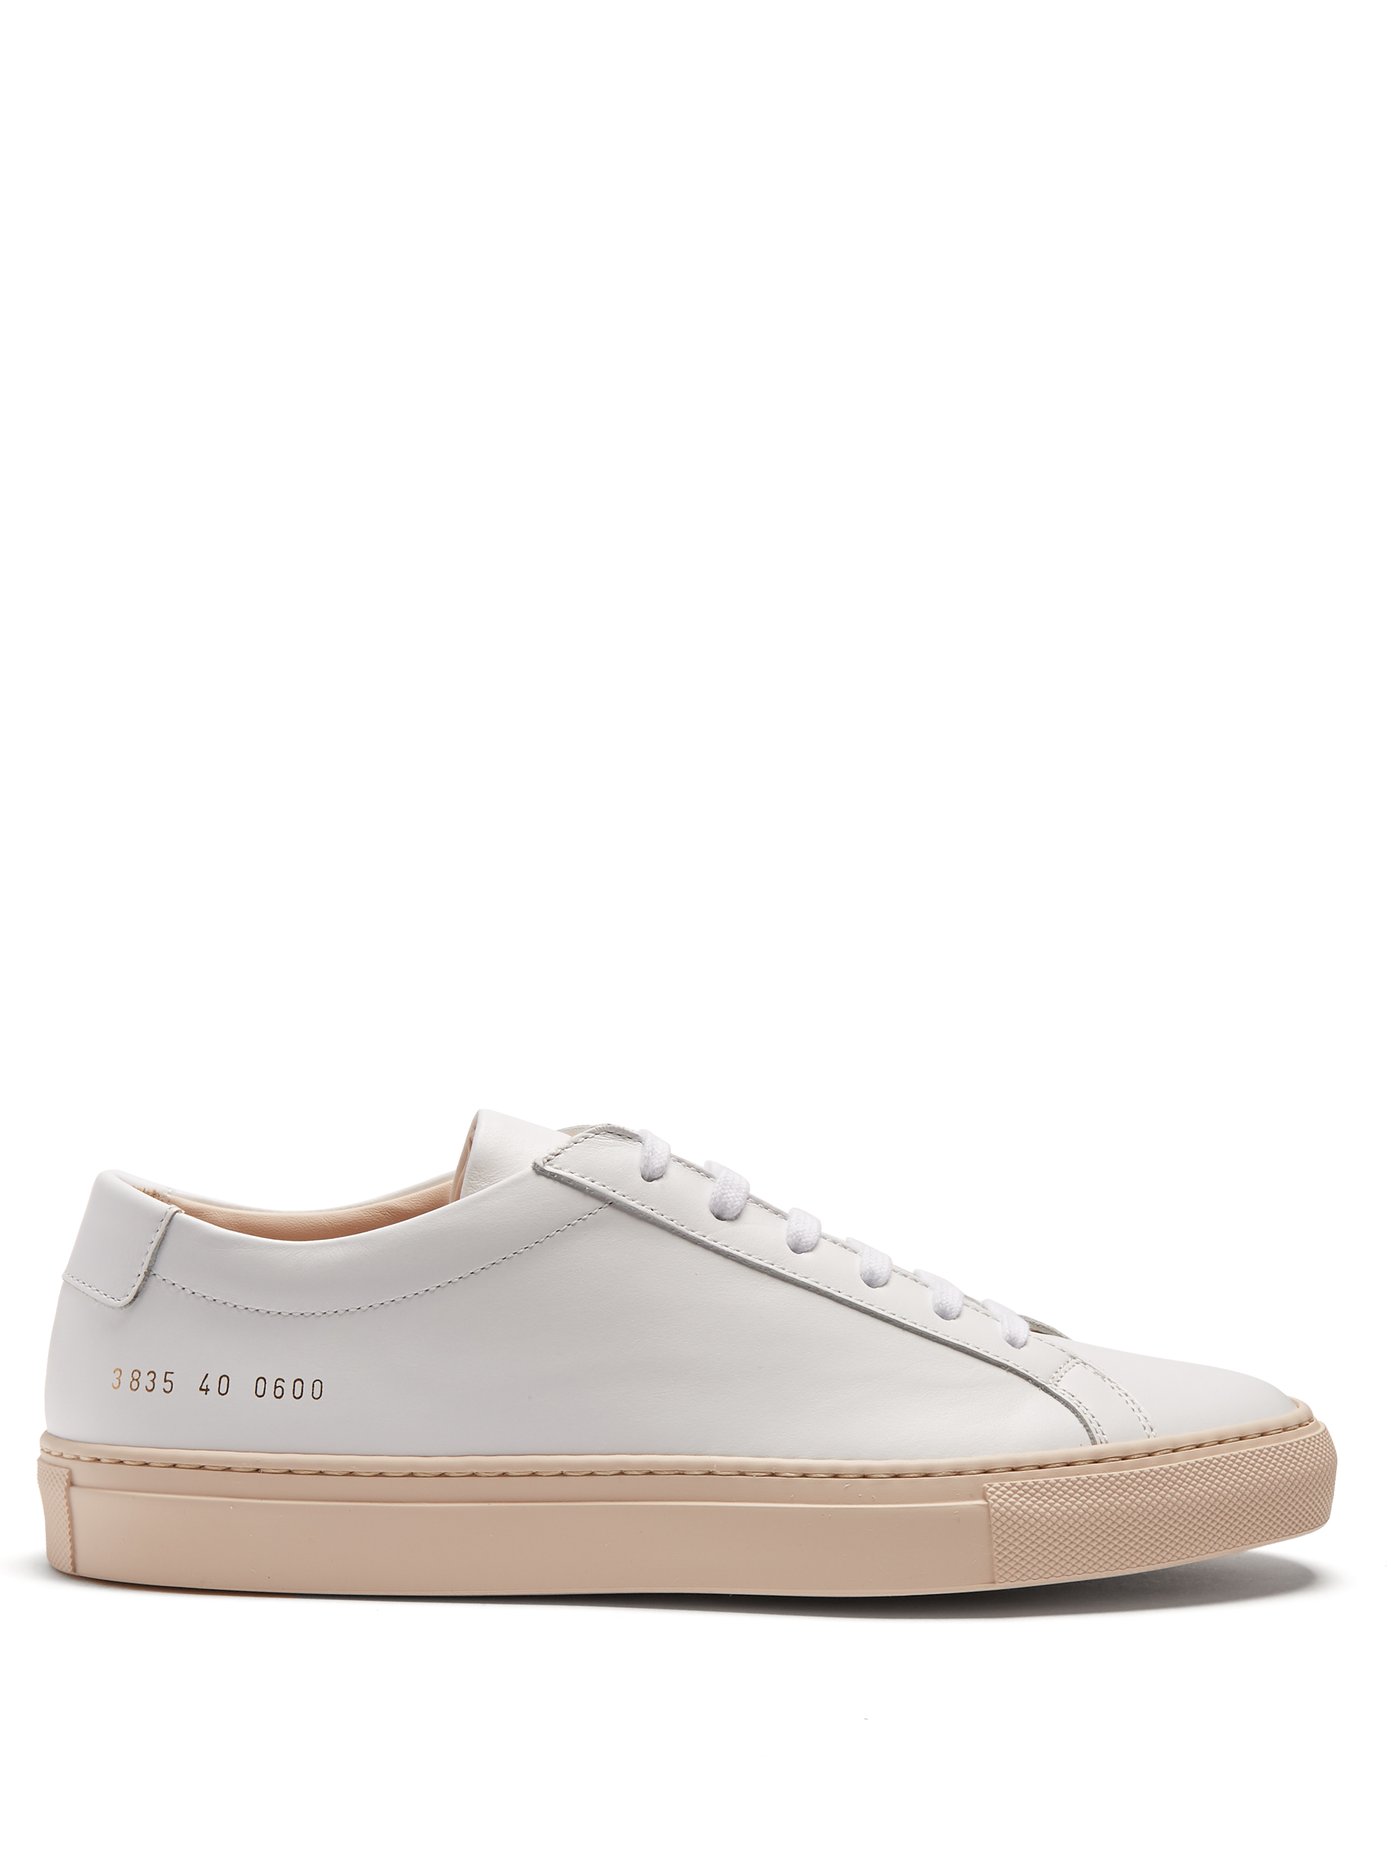 matchesfashion common projects